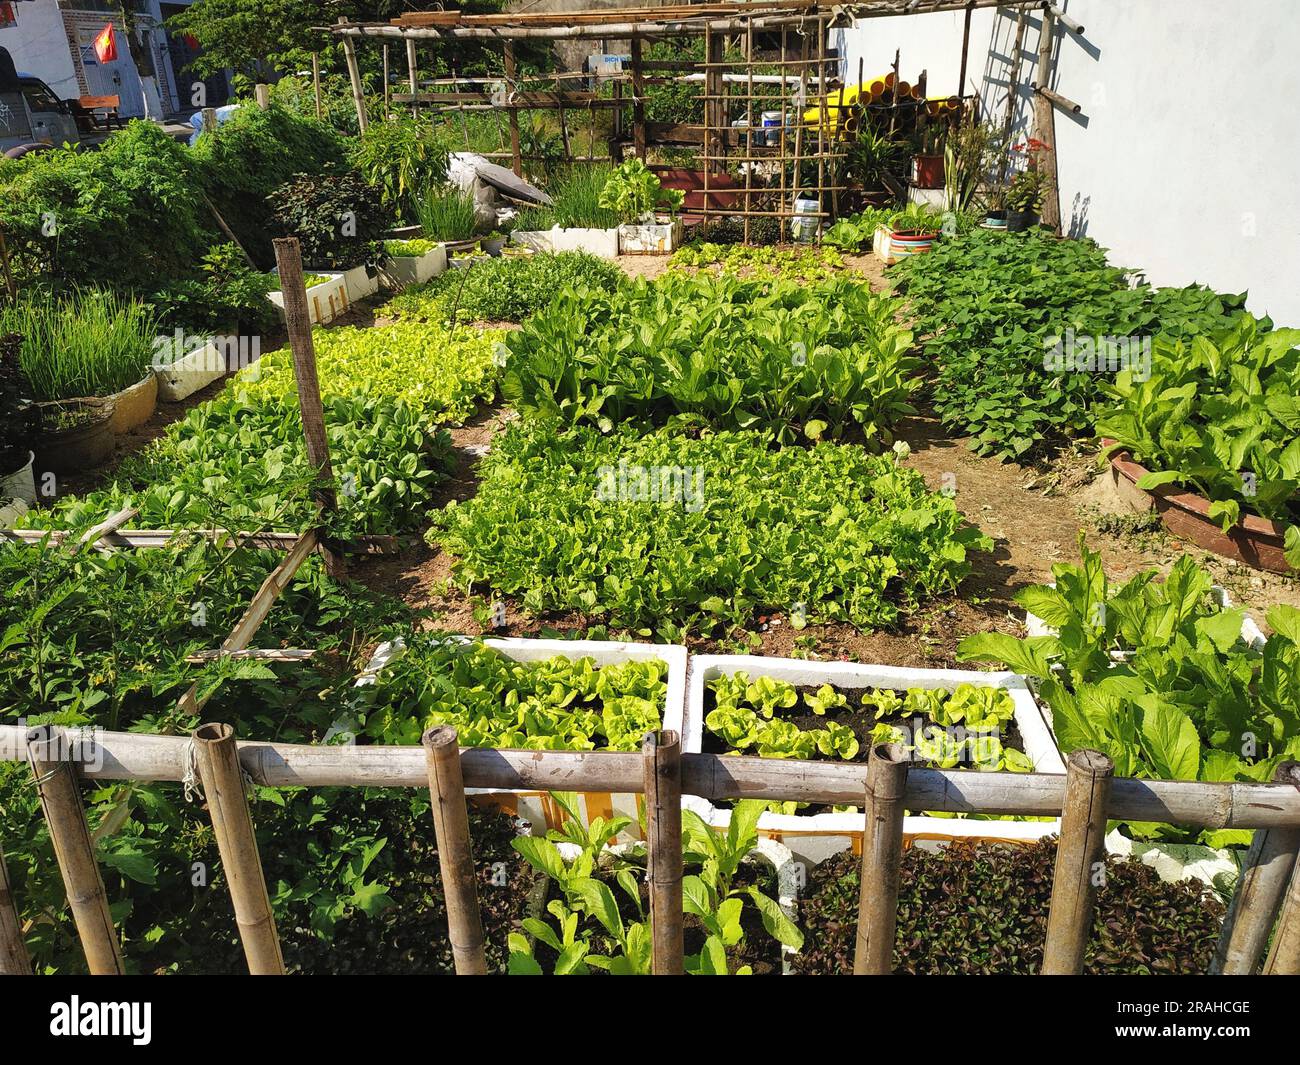 Urban agriculture in Danang, Vietnam. Small city lot filled with raised beds and container gardens produces a bounty of greens and other food crops. Stock Photo